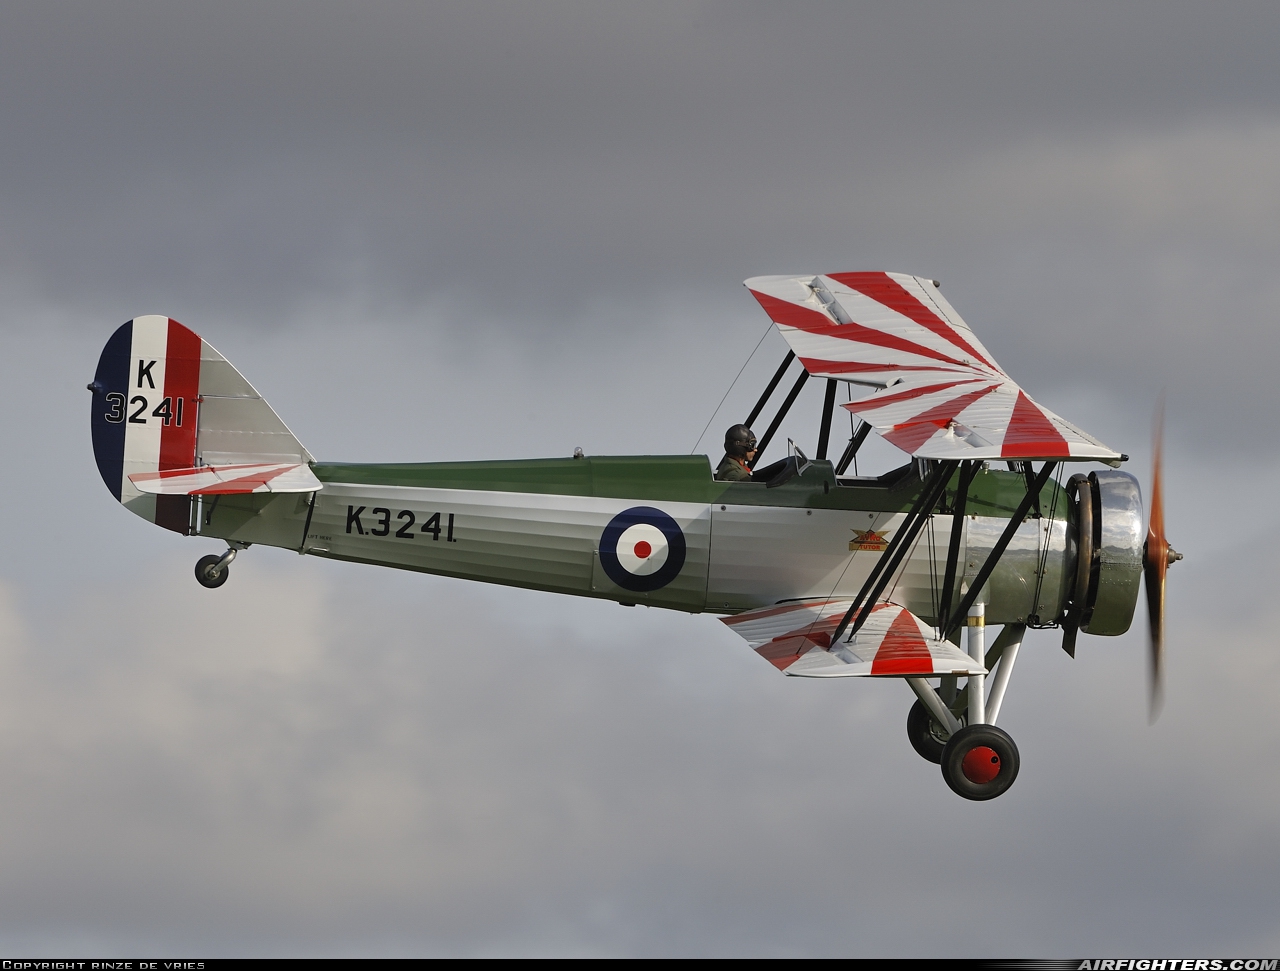 Private - The Shuttleworth Collection Avro 621 Tutor K3241 (G-AHSA) at Old Warden - Biggleswade, UK